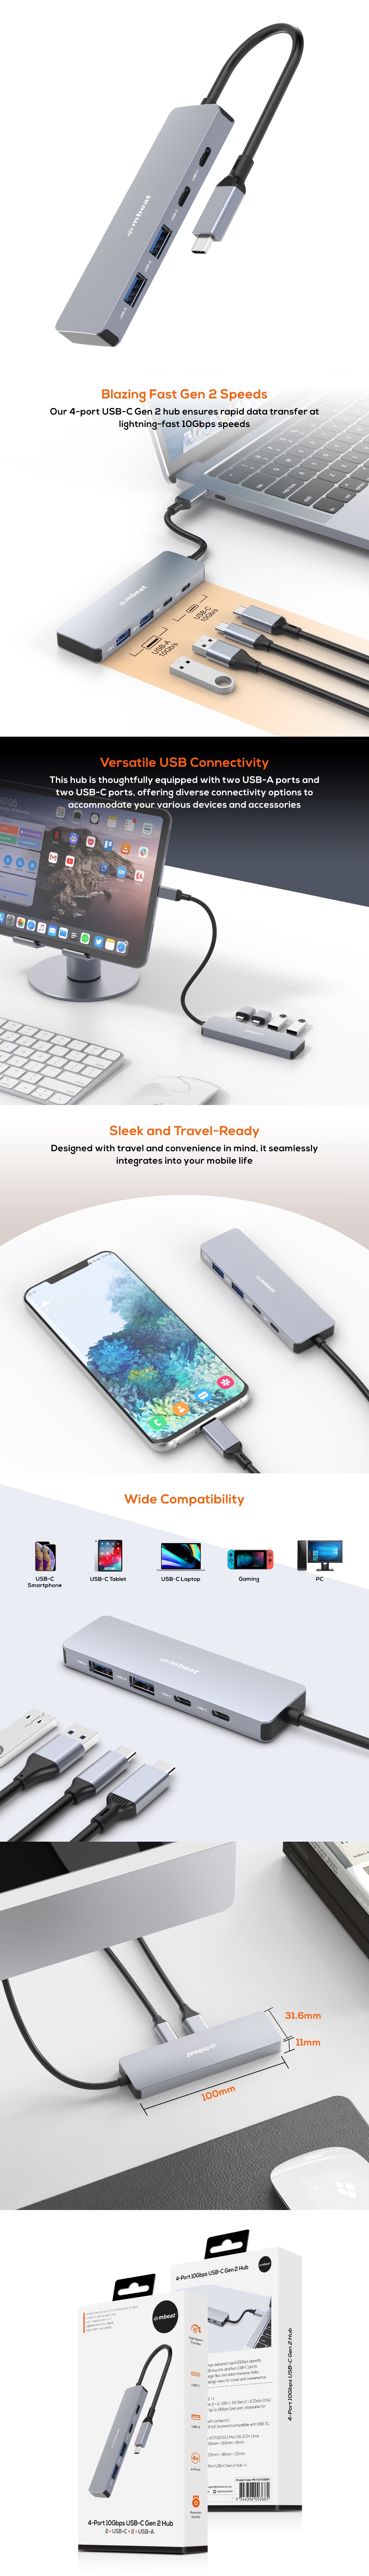 A large marketing image providing additional information about the product mBeat Elite 4-Port USB-C Gen 2 Hub - Additional alt info not provided